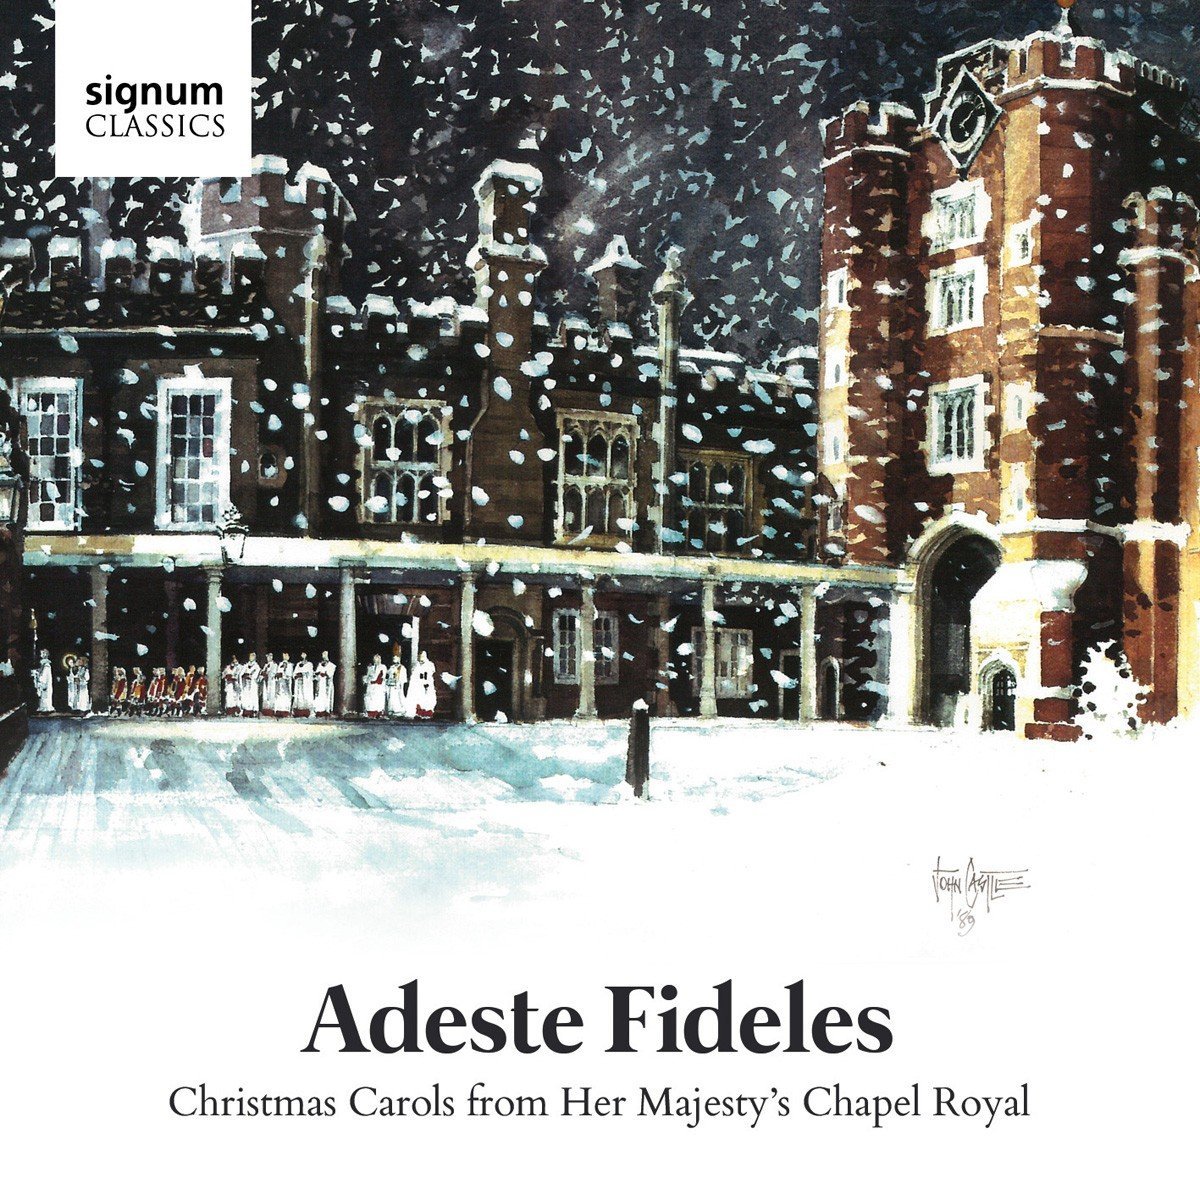 Huw Williams & Choir of the Chapel Royal - Adeste Fideles: Christmas Carols from her Majesty’s Chapel Royal (2016) [HDTracks FLAC 24bit/96kHz]